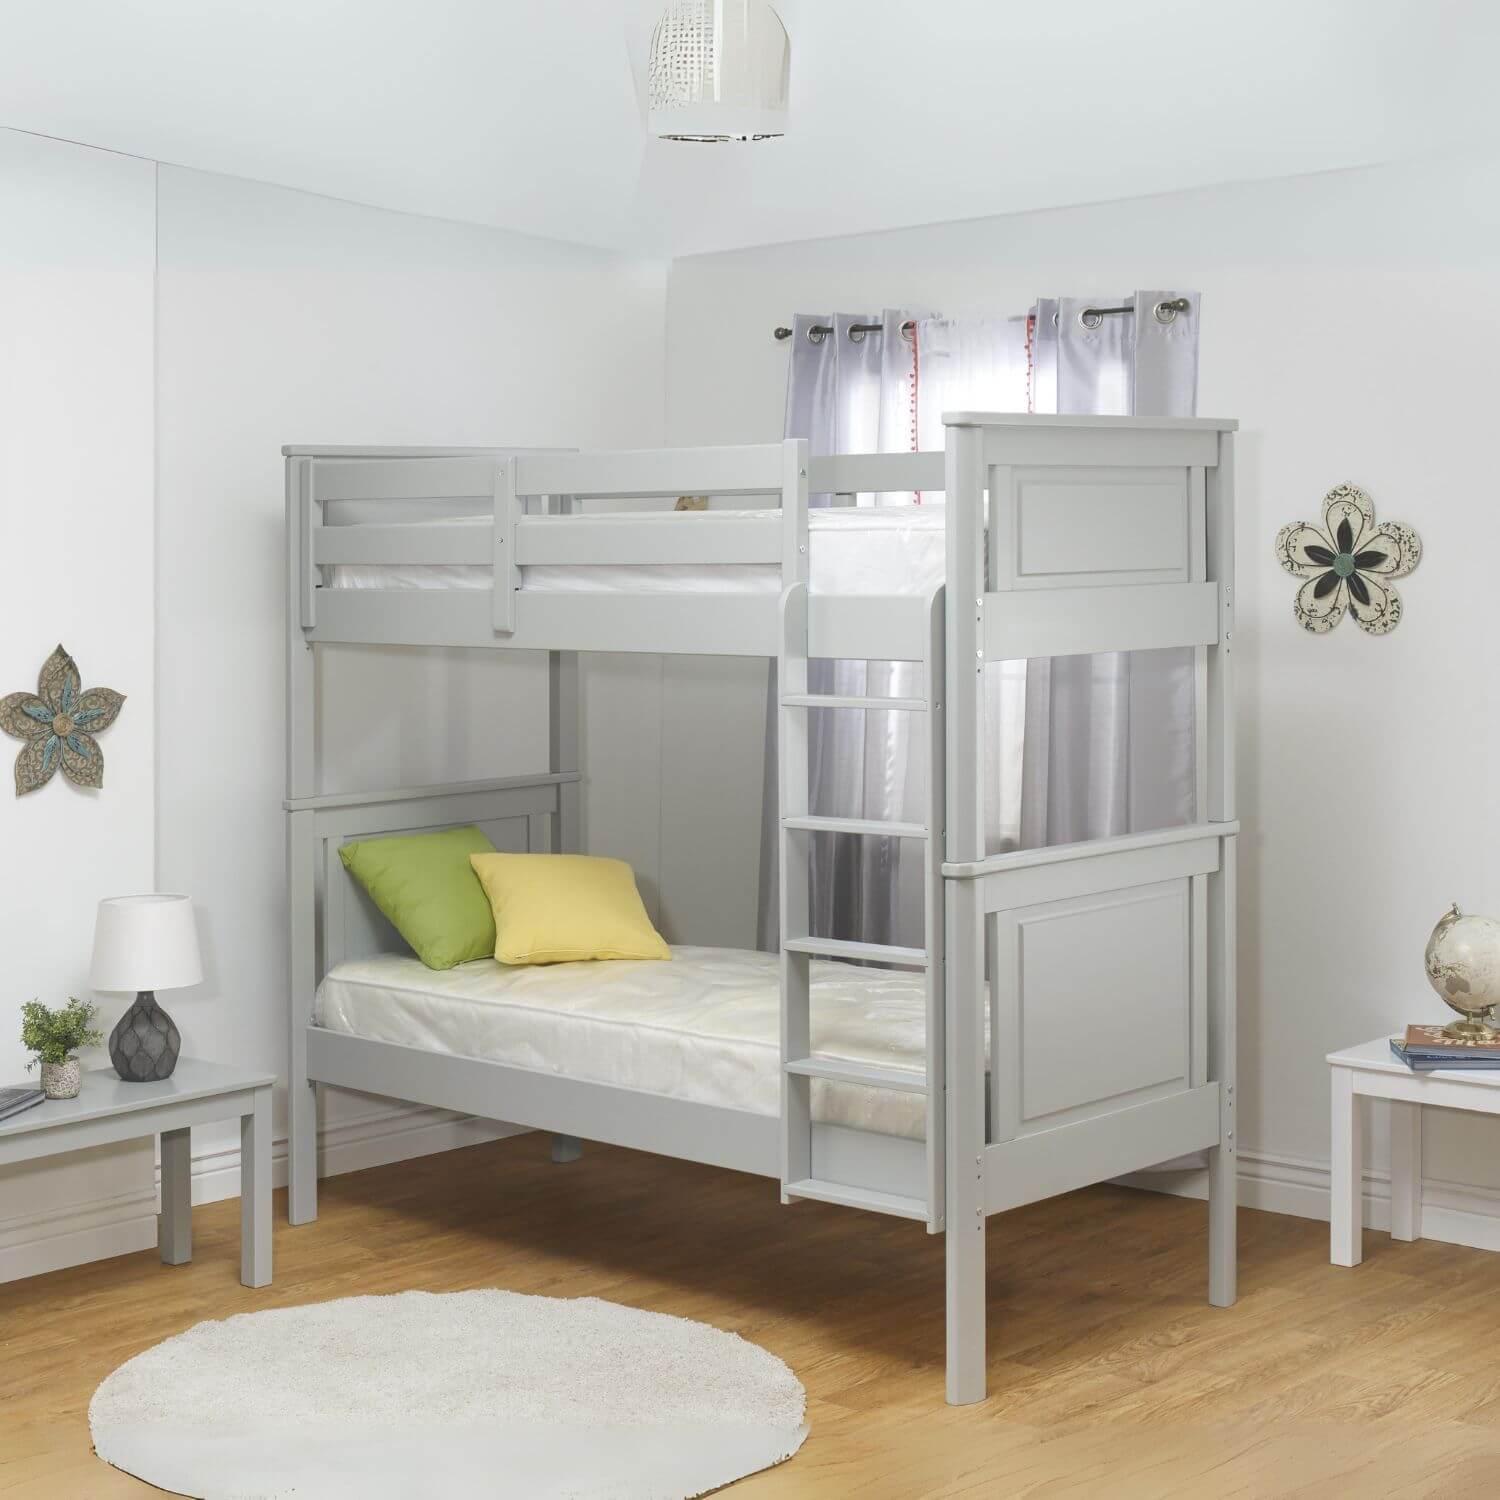 Orbelle Bunk Bed Model 302 Gray - Lifestyle